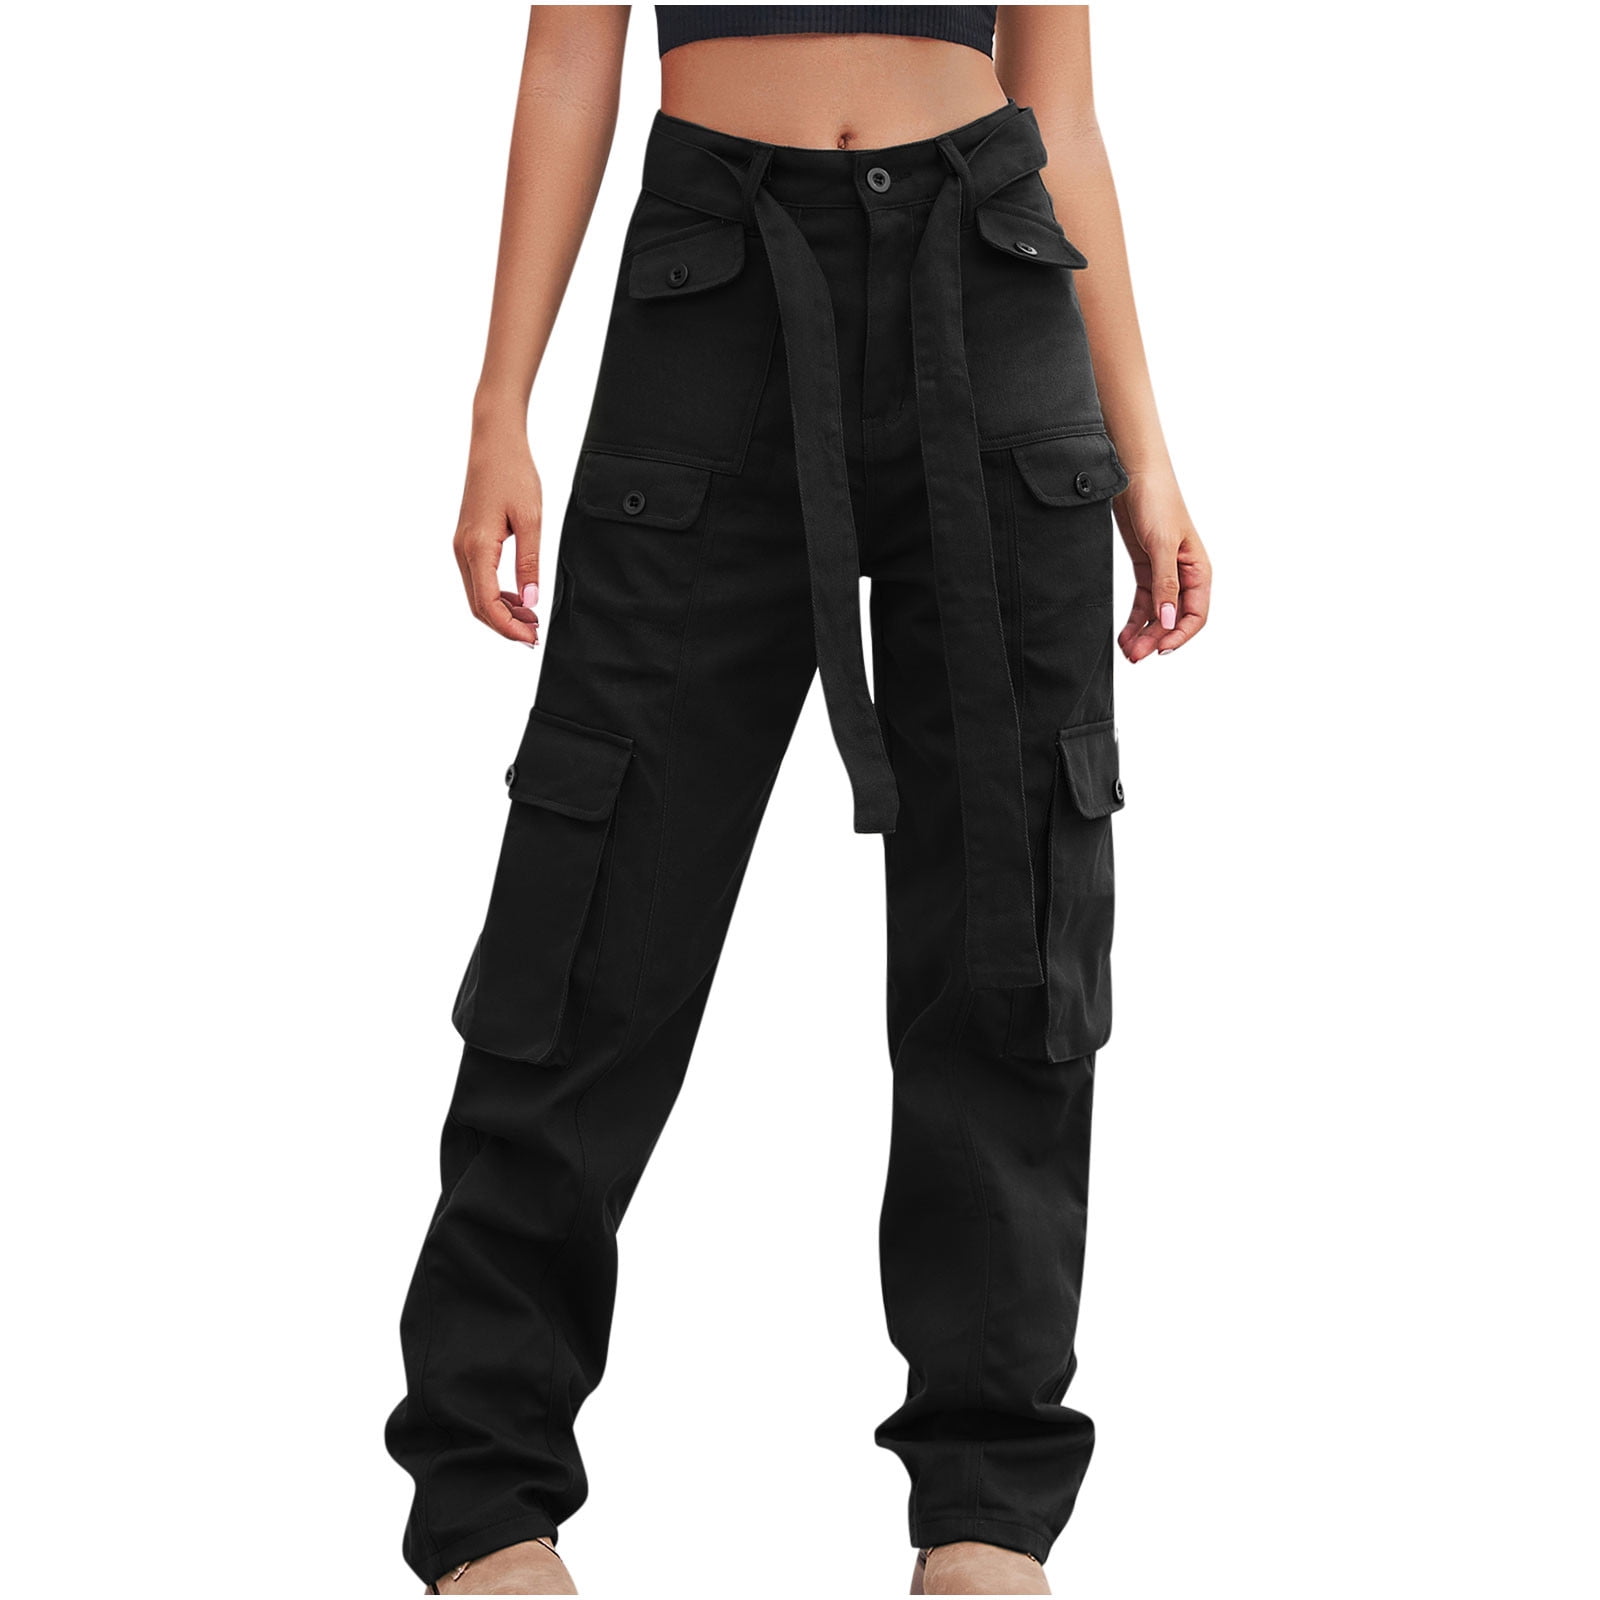 SELONE Womens Black Cargo Pants With Pockets Denim Casual